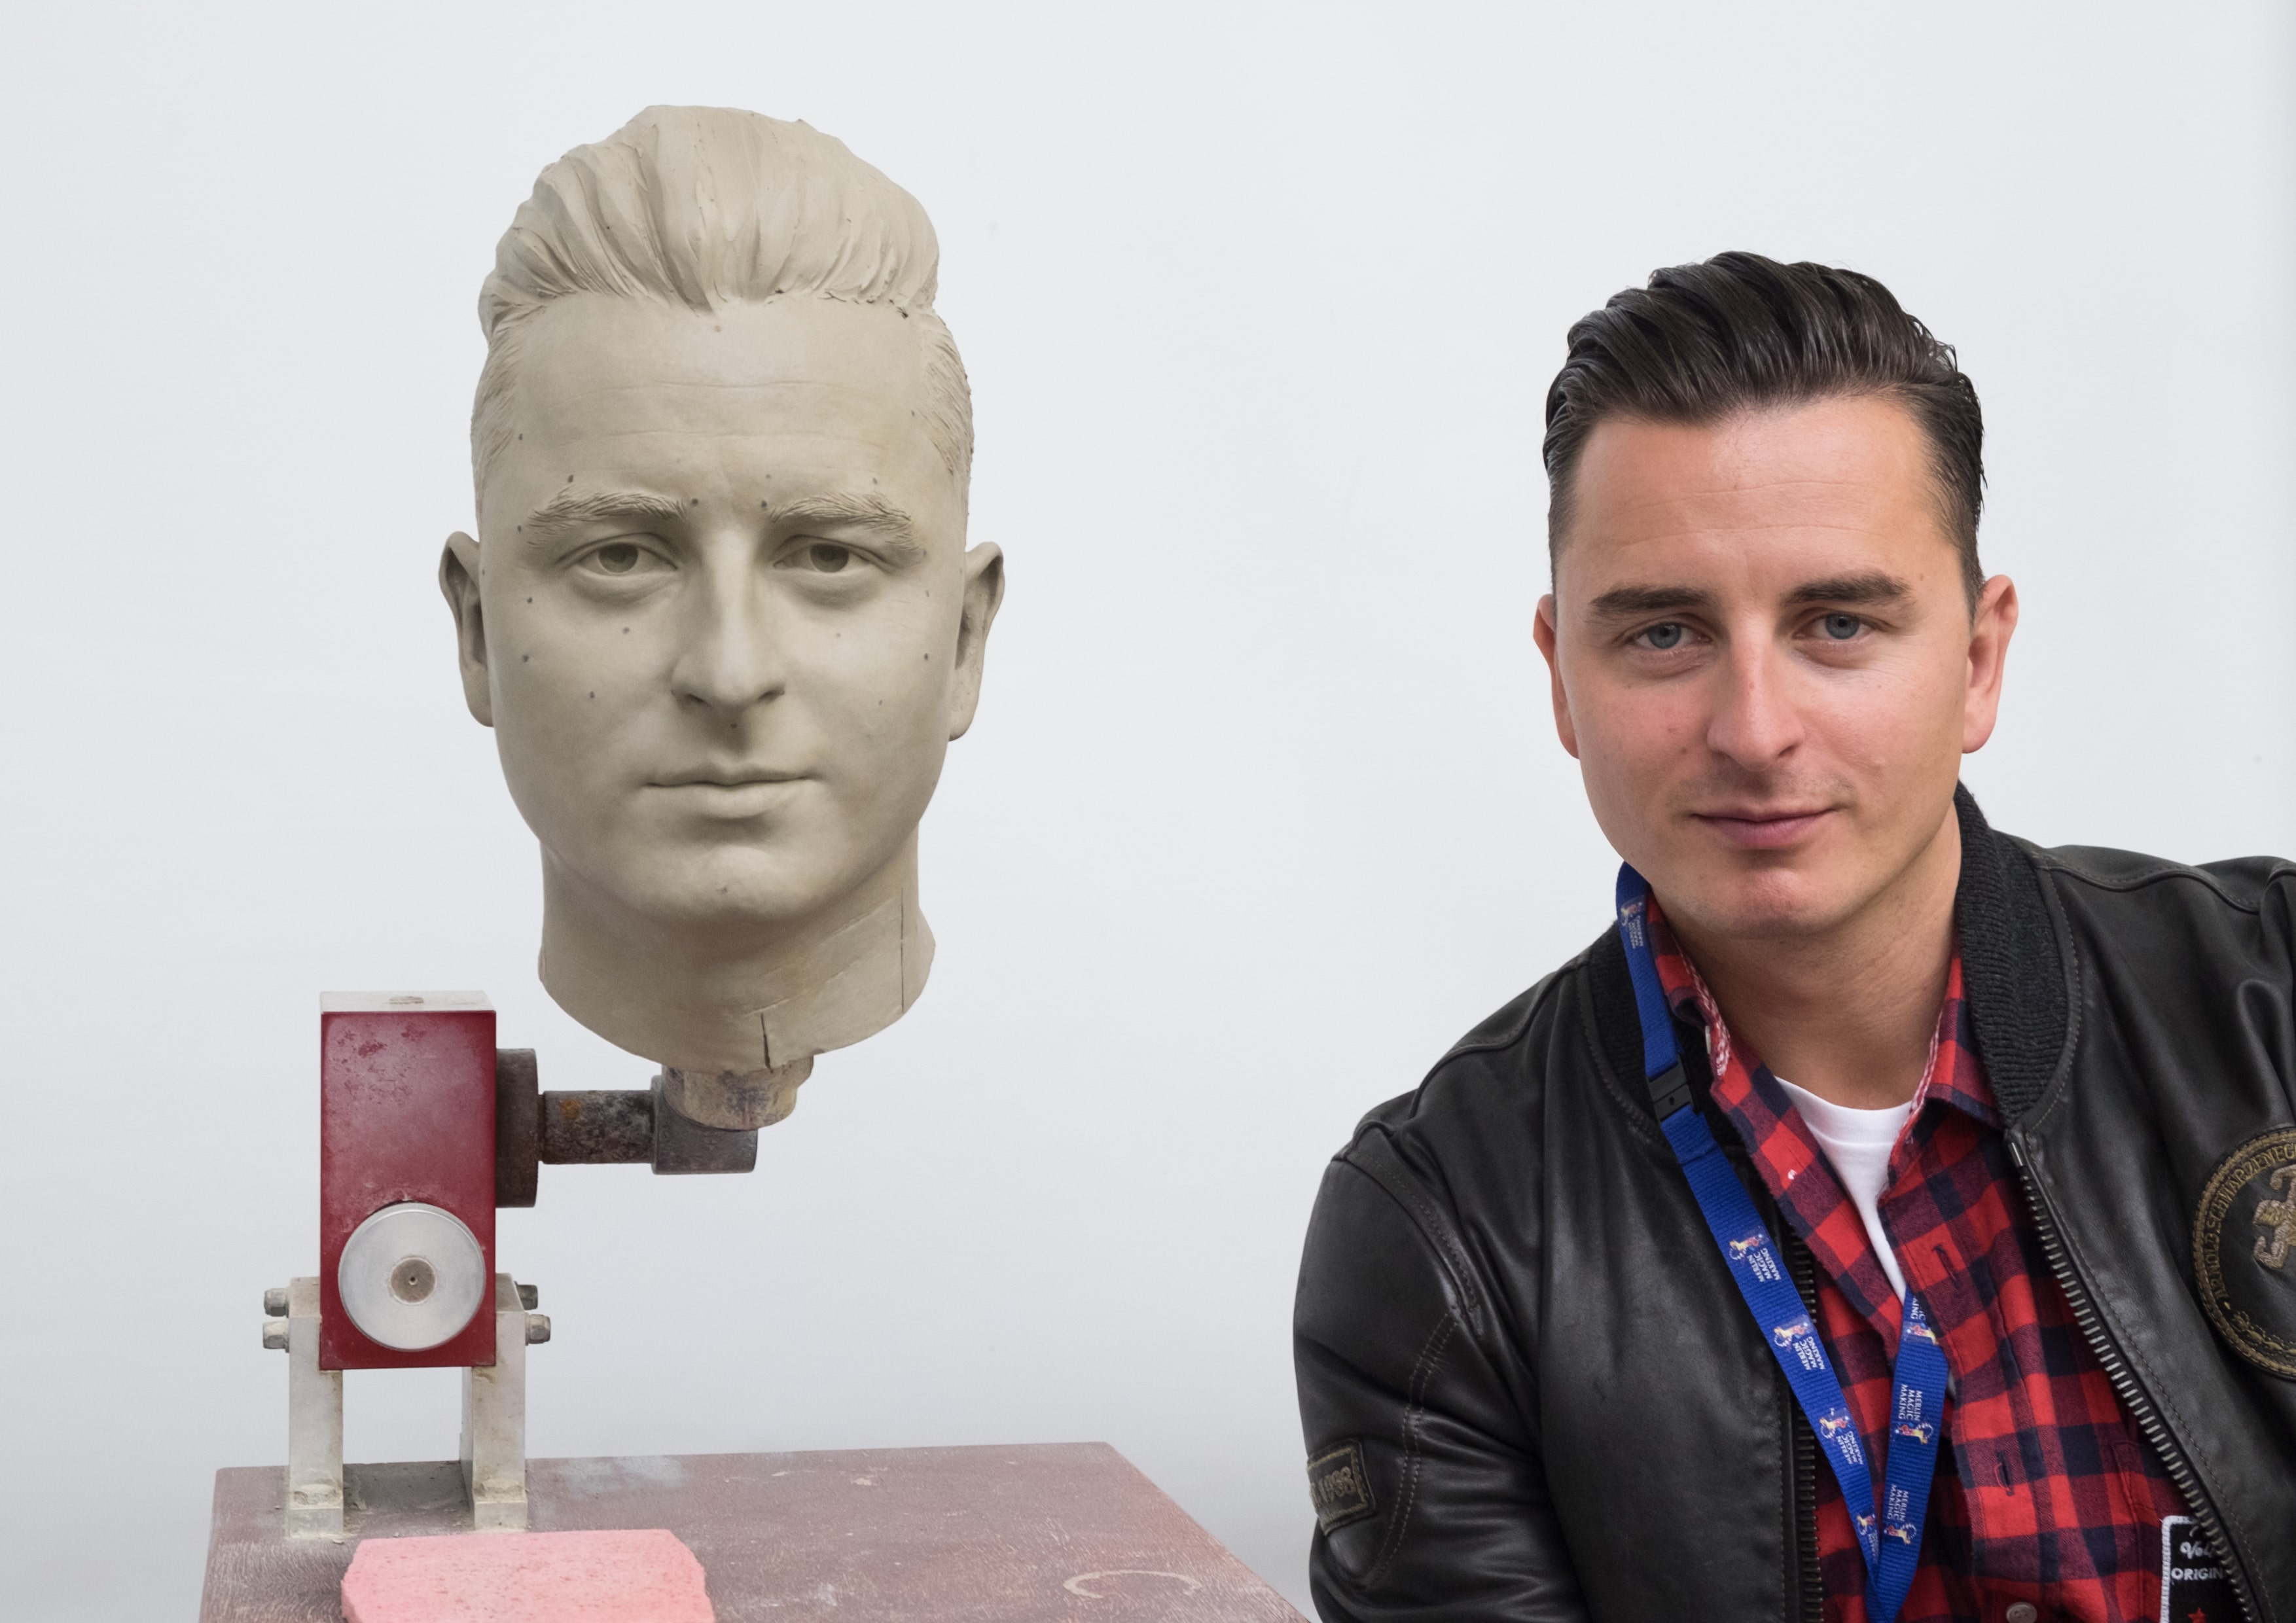 Andreas Gabalier during the creation of his wax figure at Madame Tussauds™ Vienna